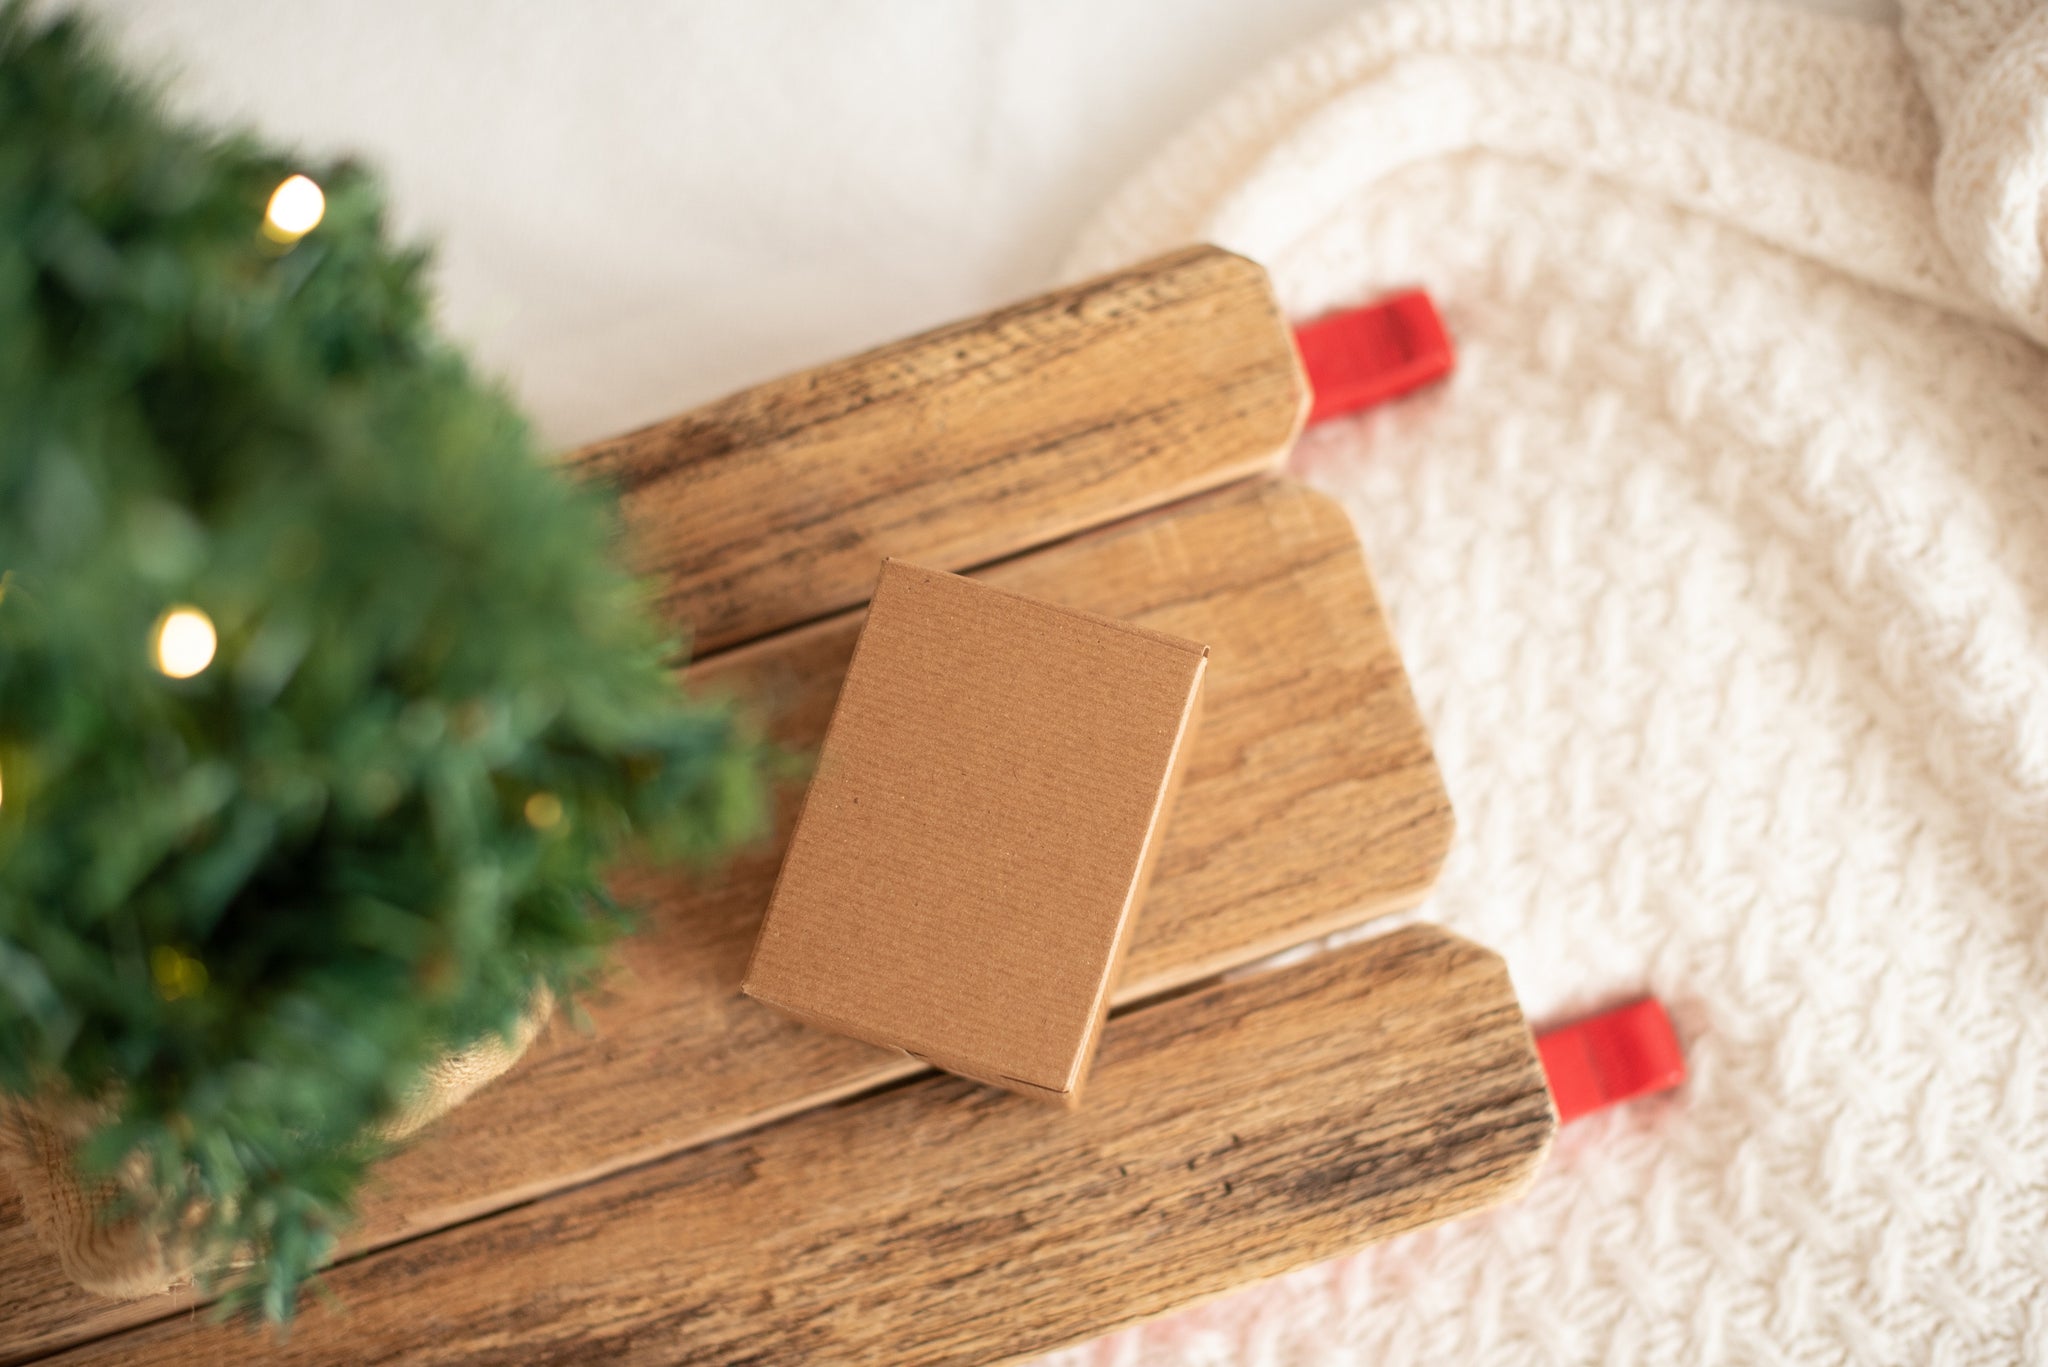 7 Creative Ways to Recycle Christmas Wrapping - FLAME Furnace